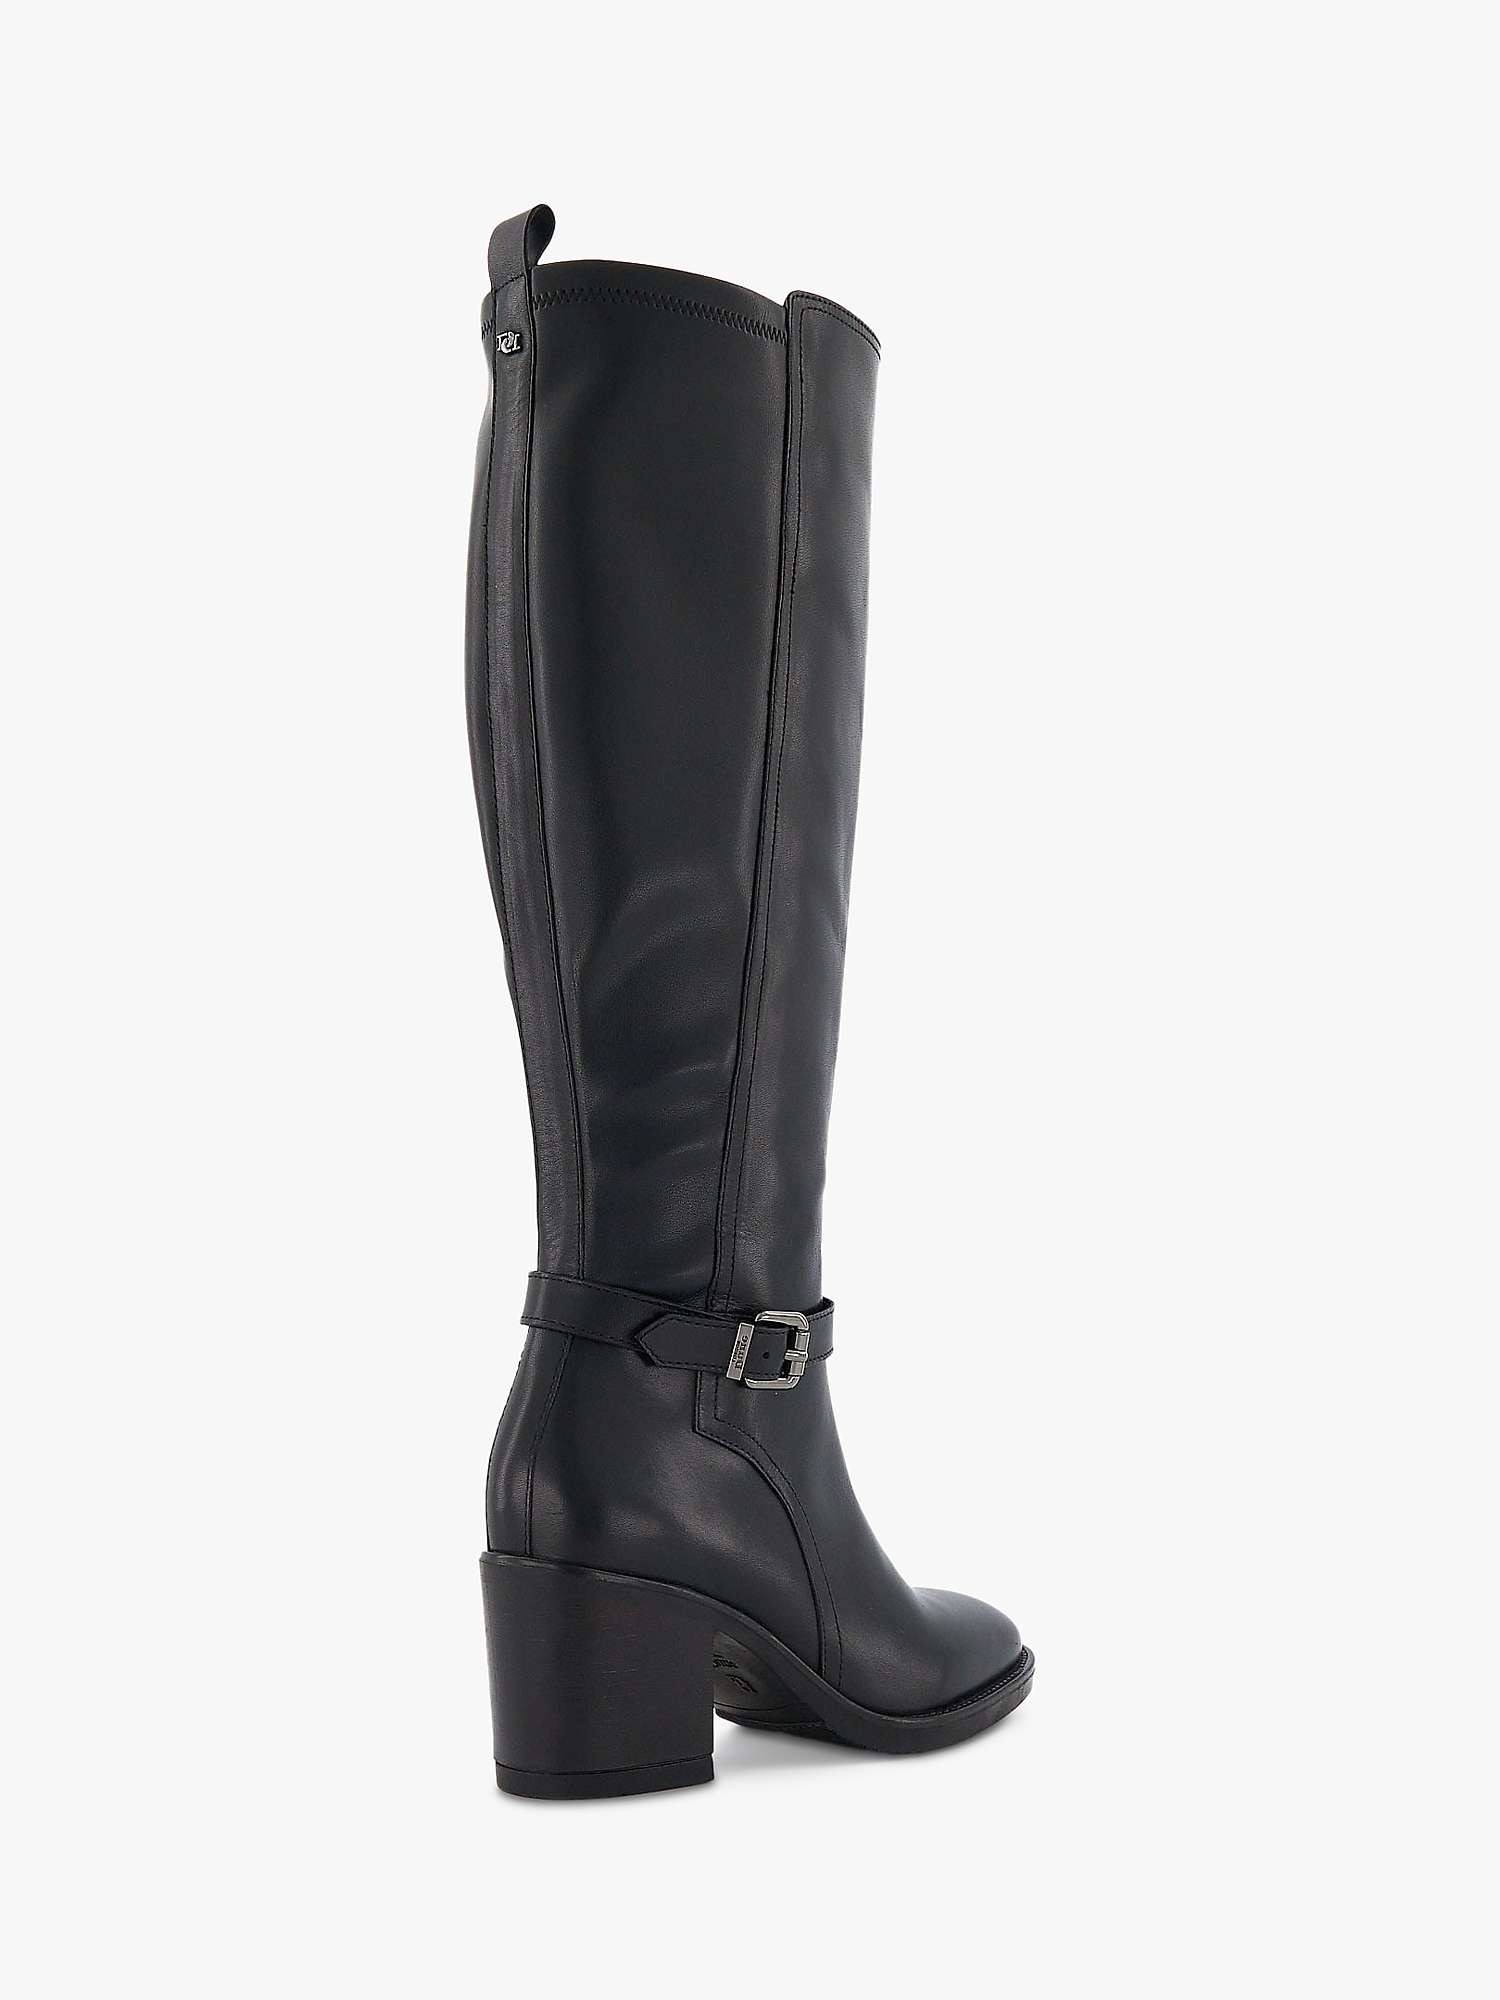 Buy Dune Trance Leather Calf Boots Online at johnlewis.com